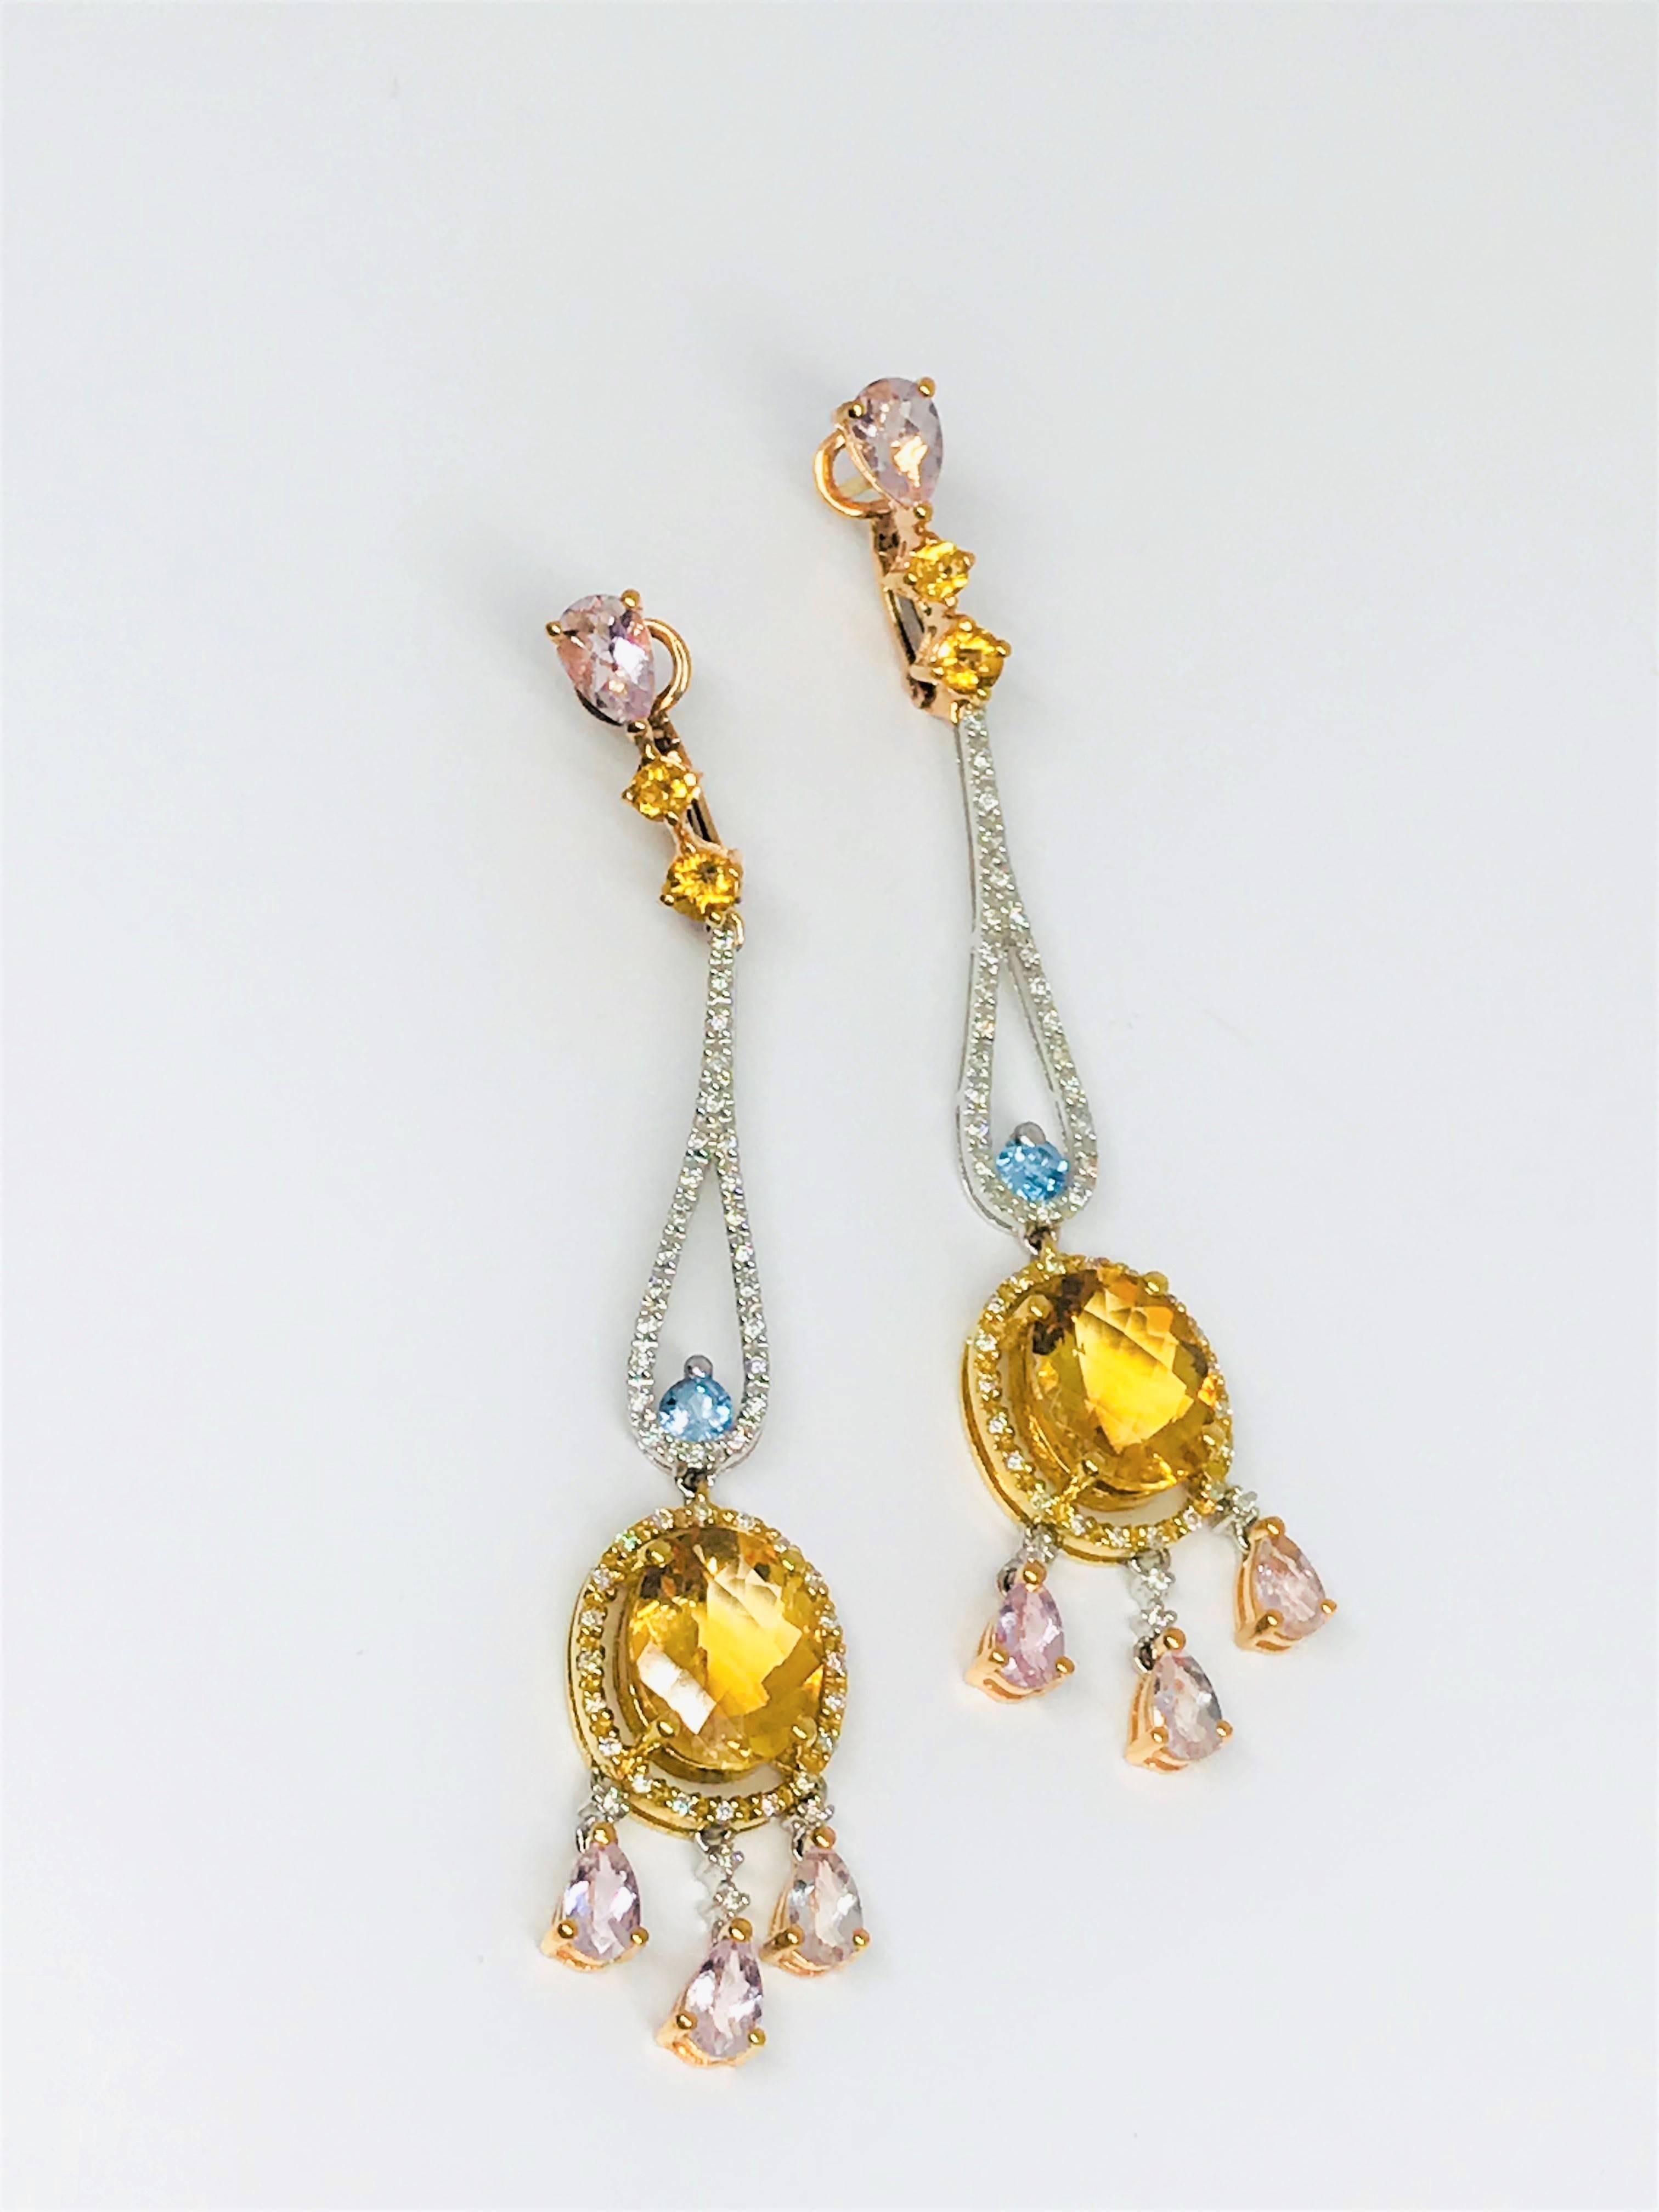 Spectacular new Effy chandelier style earrings. These beauties are 18K tri-color gold, set with natural 2 1/2cttw Morganite, 3cttw Citrine, .20cttw Topaz, and 1/2cttw Diamonds. These earrings have posts and omega clips for security. Fantastic